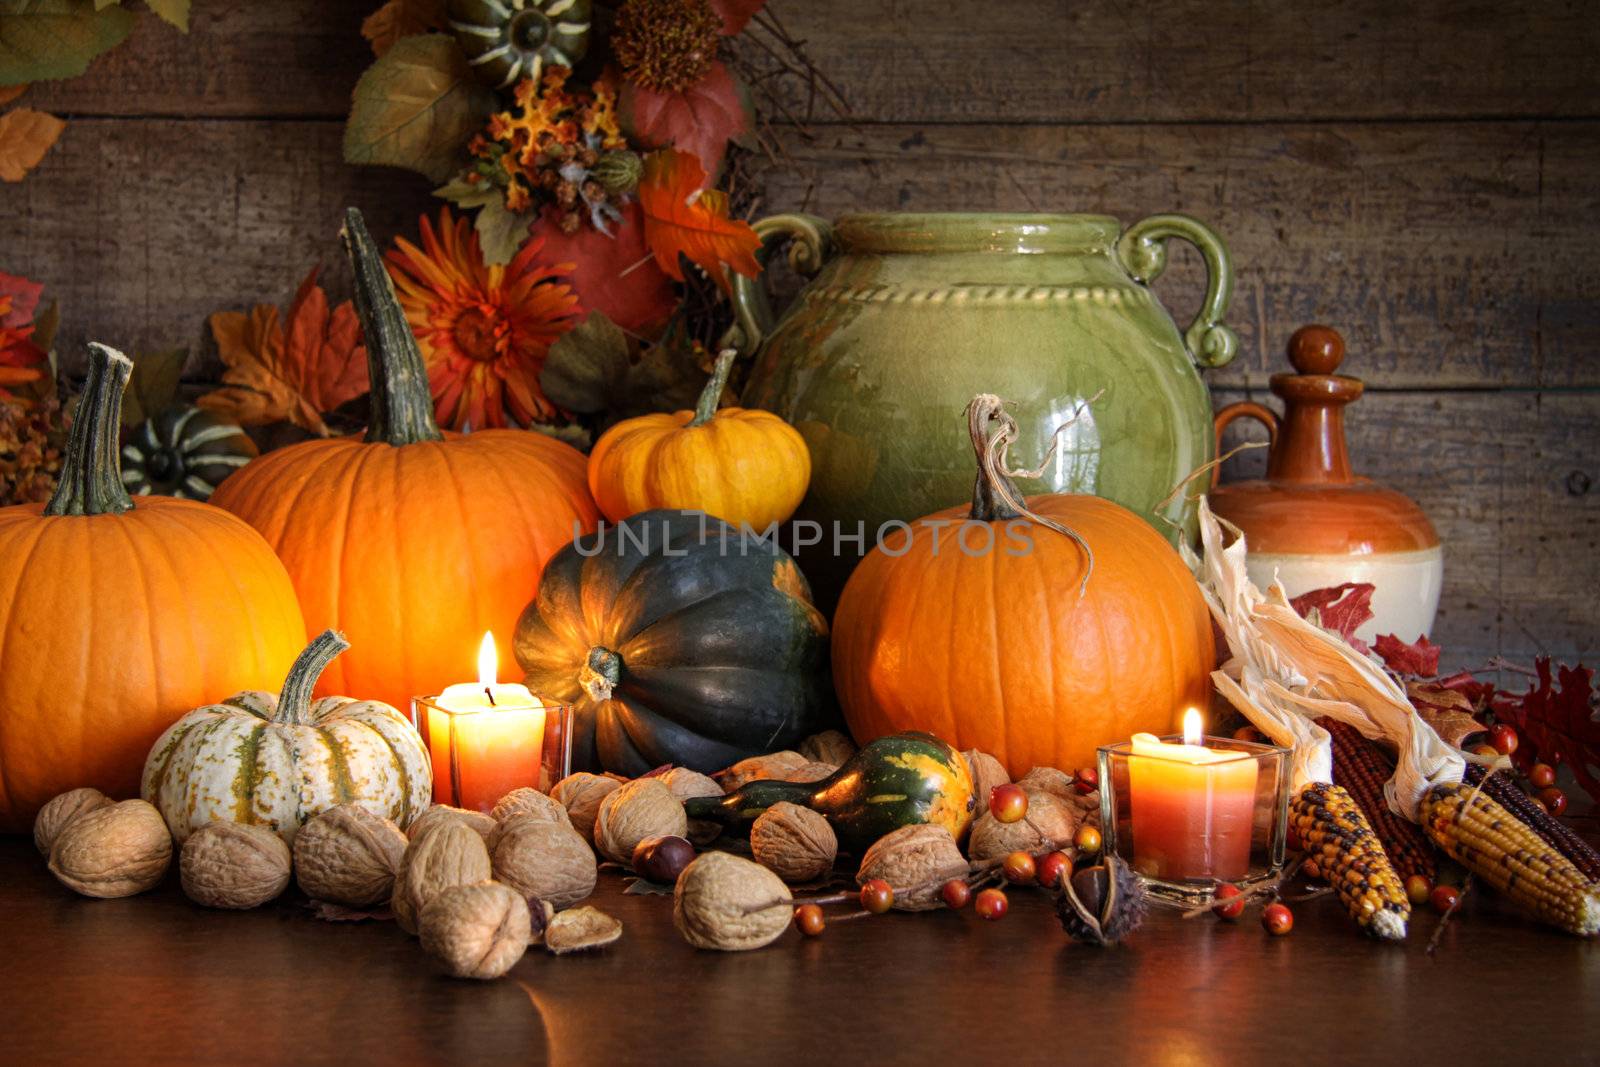 Festive autumn variety of gourds and pumpkins  by Sandralise